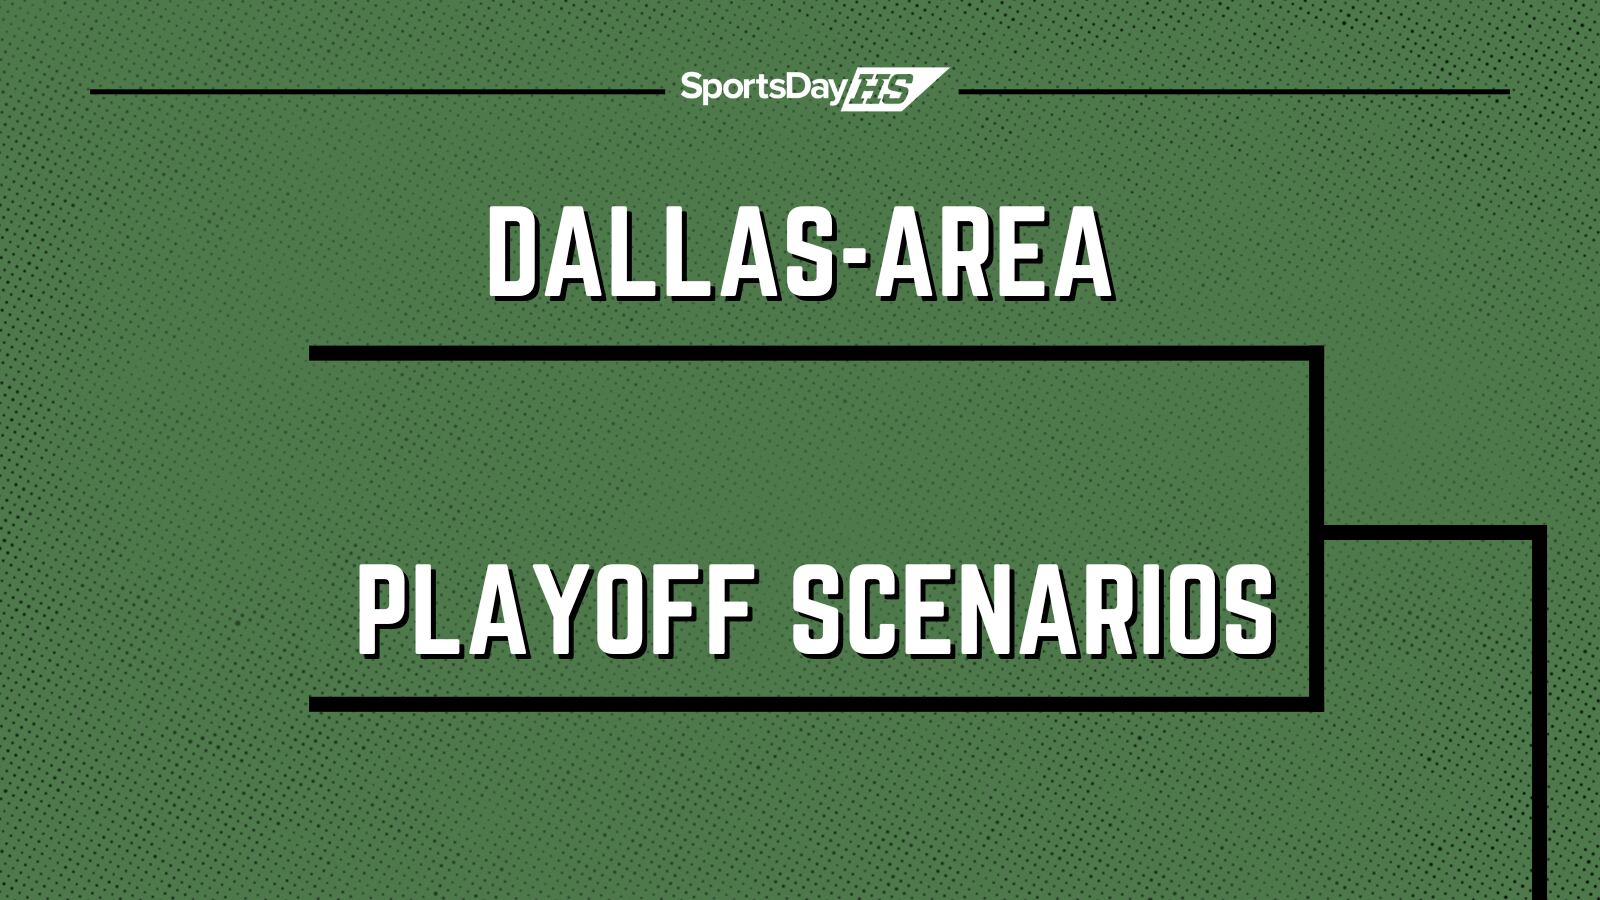 Who will make the playoffs this year?